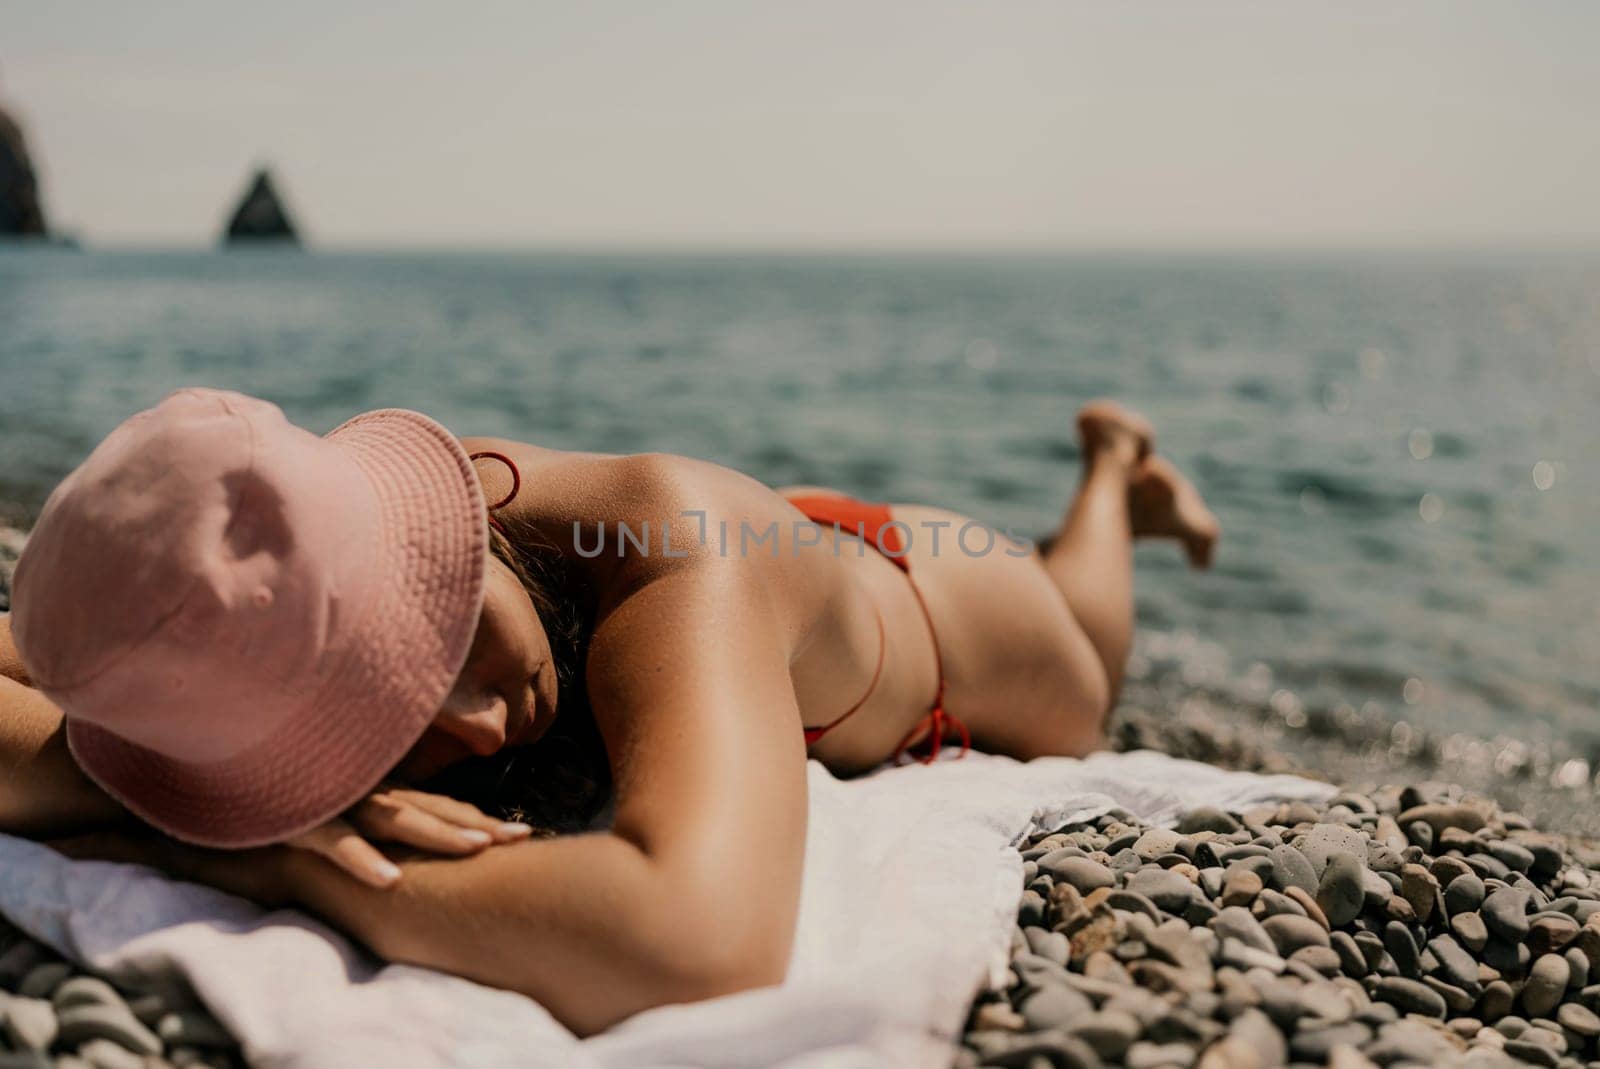 A woman sunbathes on the beach, lying on her stomach in a red swimsuit against the sea backdrop